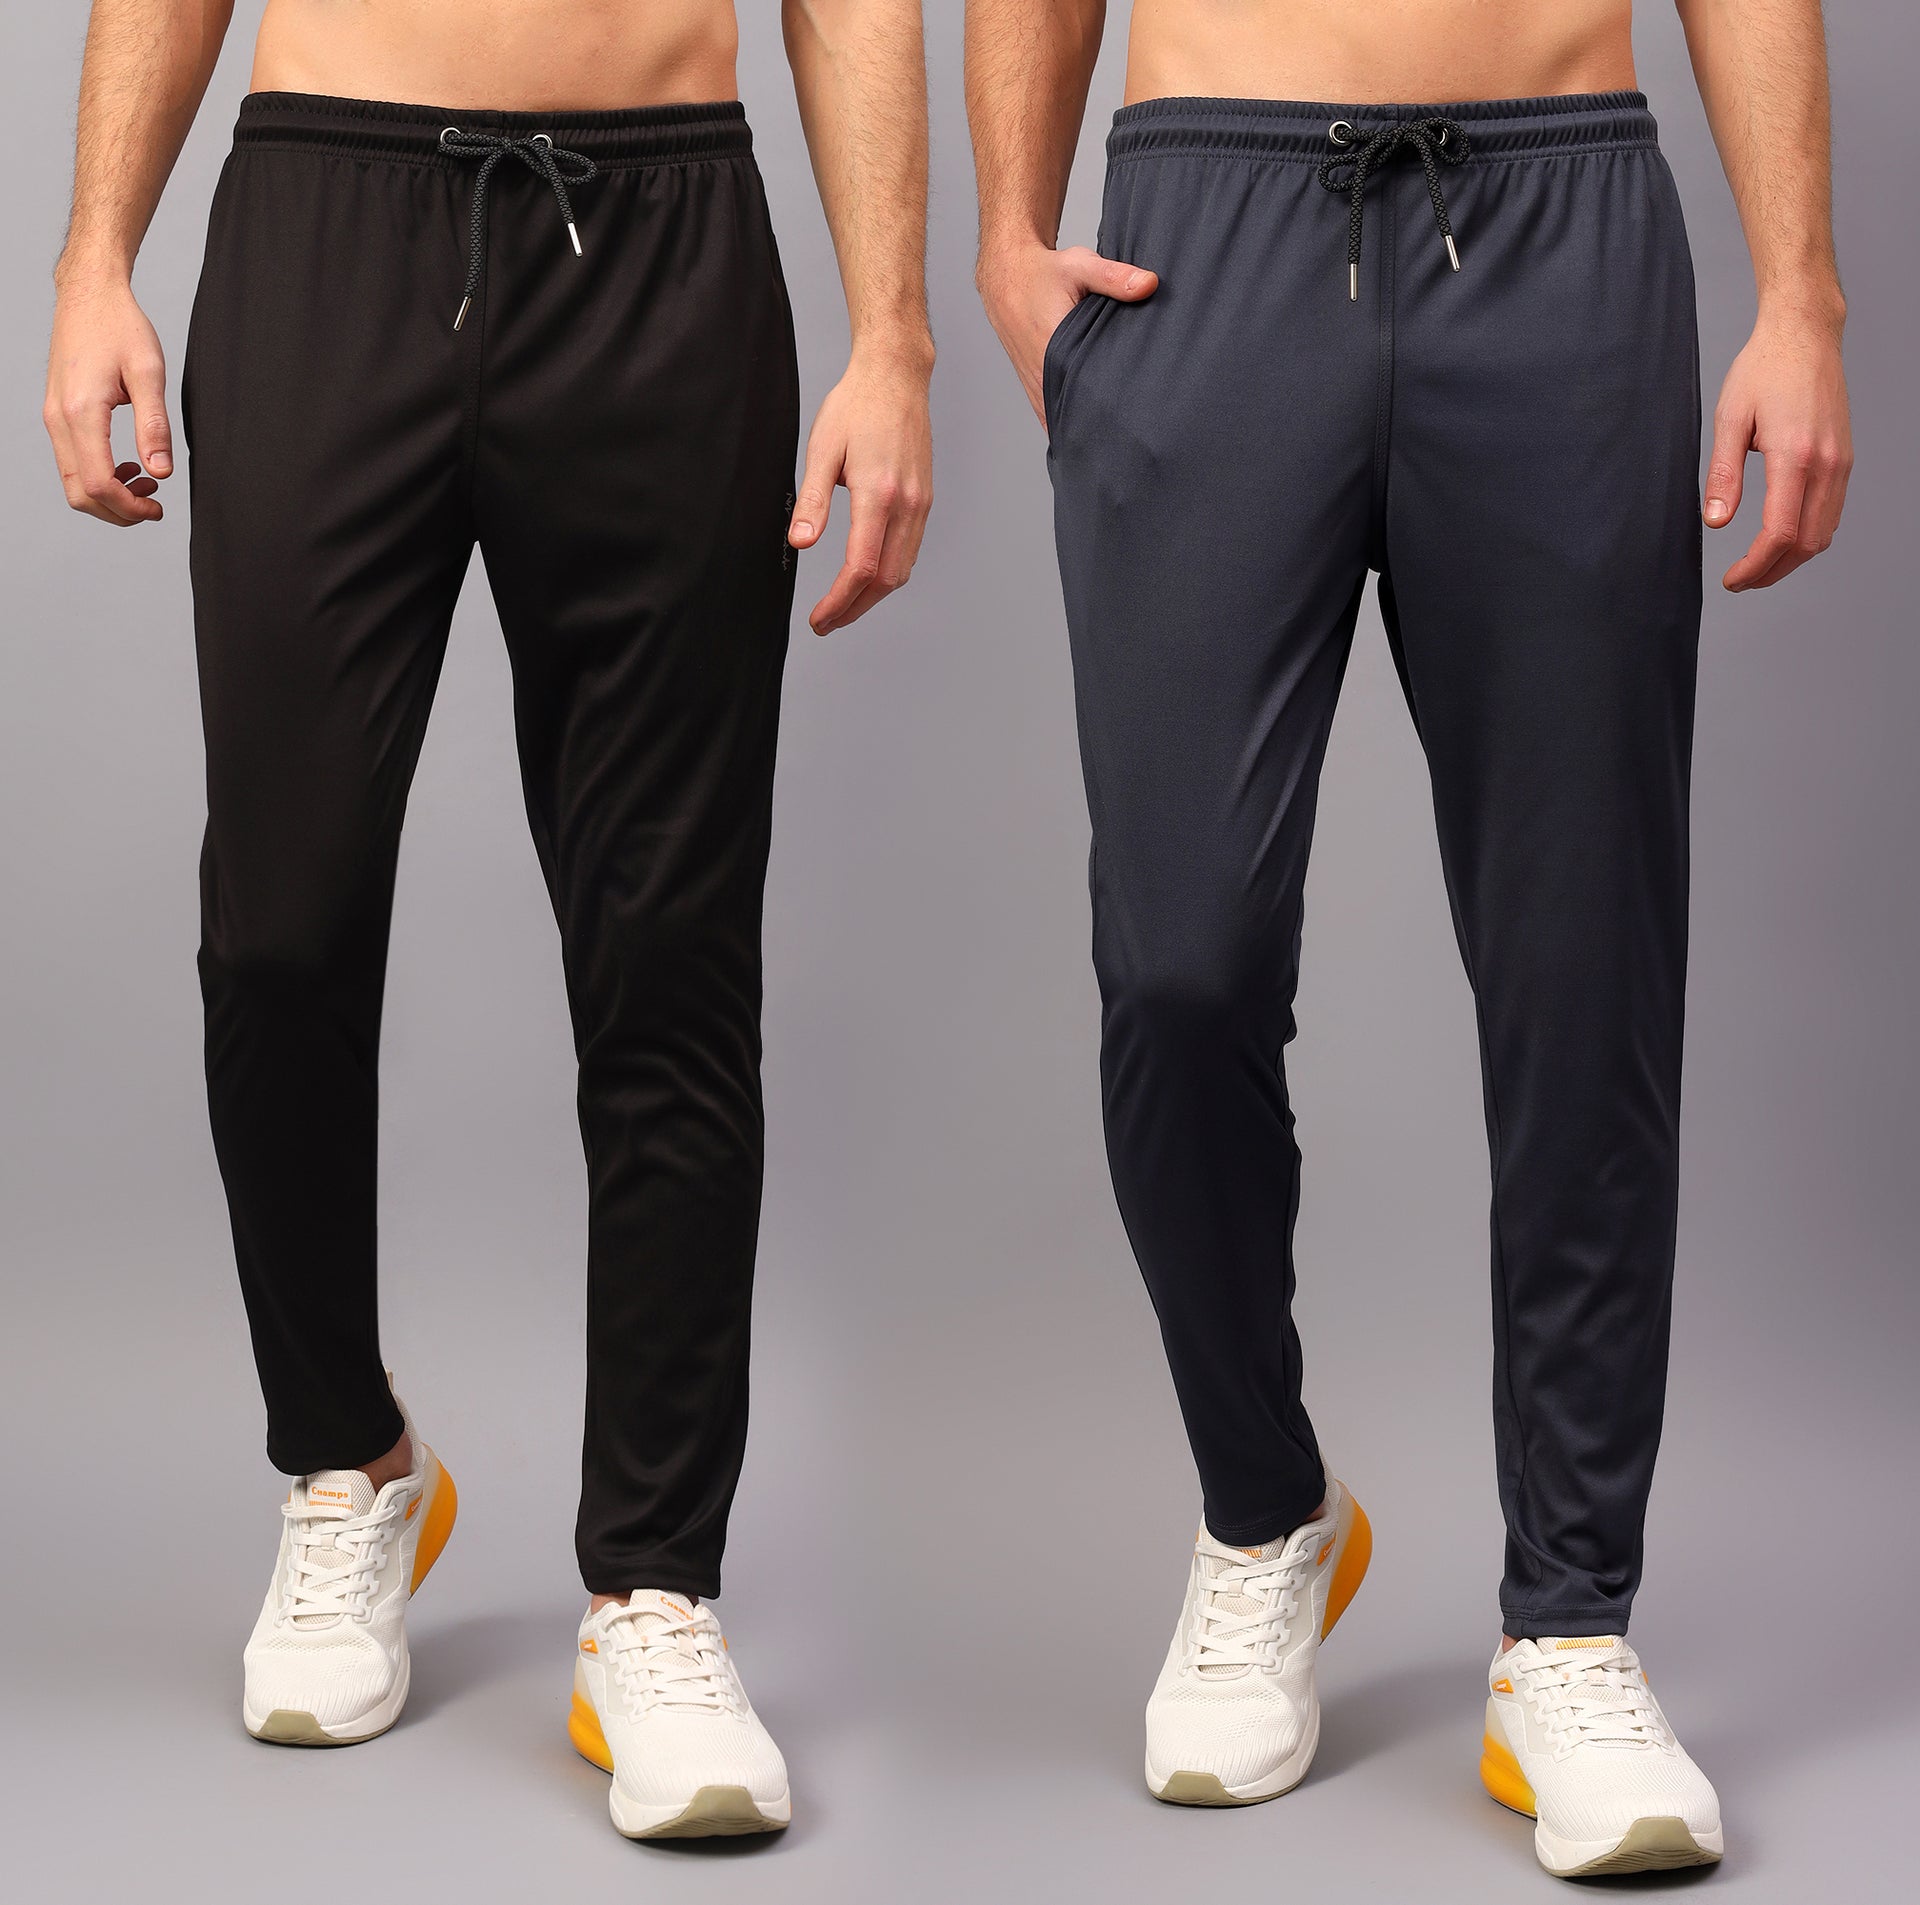 Ns Lycra Sports Lower at Rs 240/piece